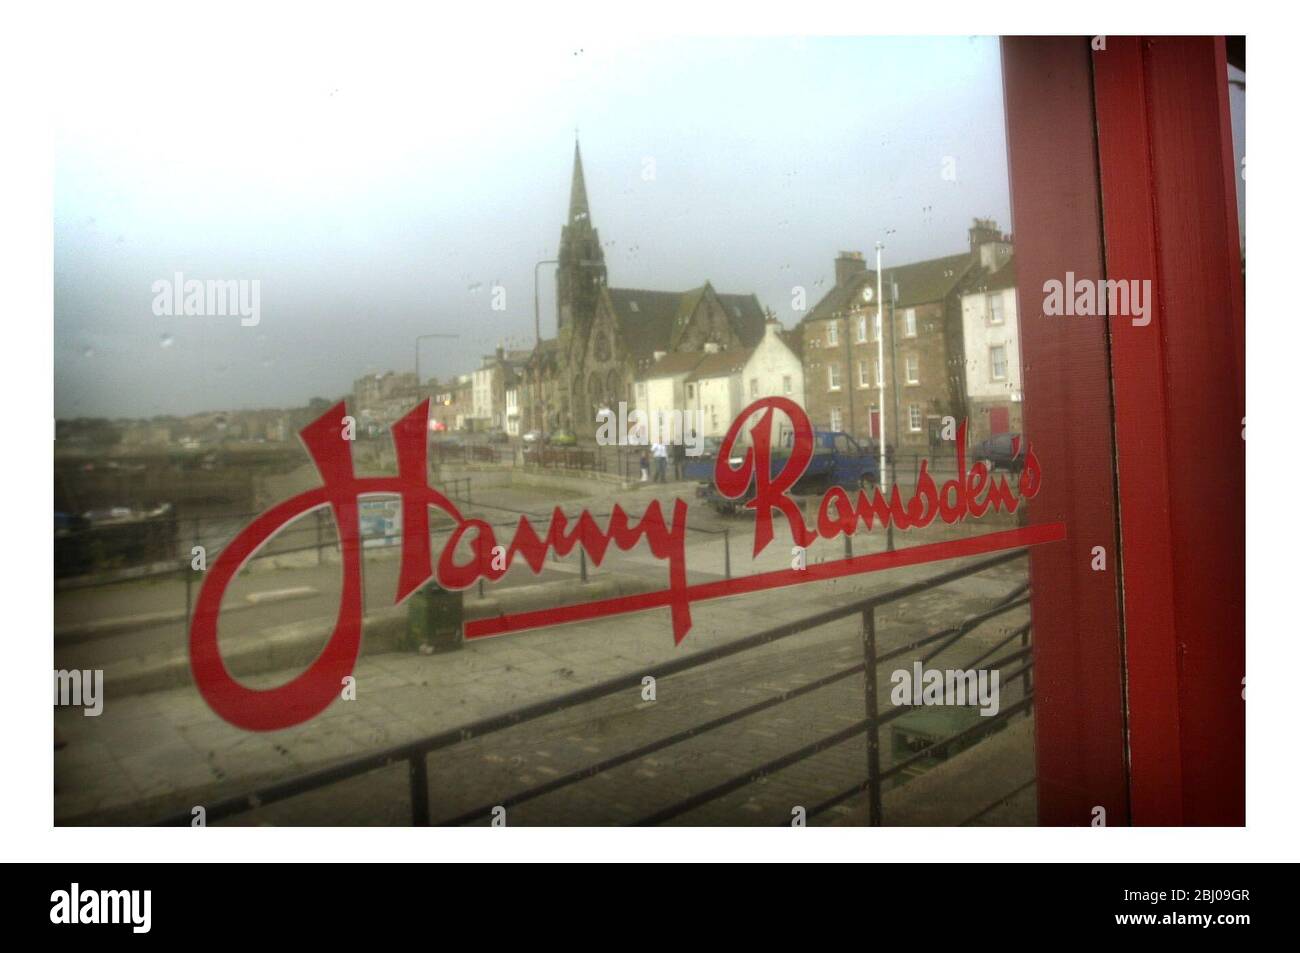 HARRY RAMSDENS RESTAURANT IN NEWHAVEN(REFLECTED IN GLASS). - 2002 Stock Photo